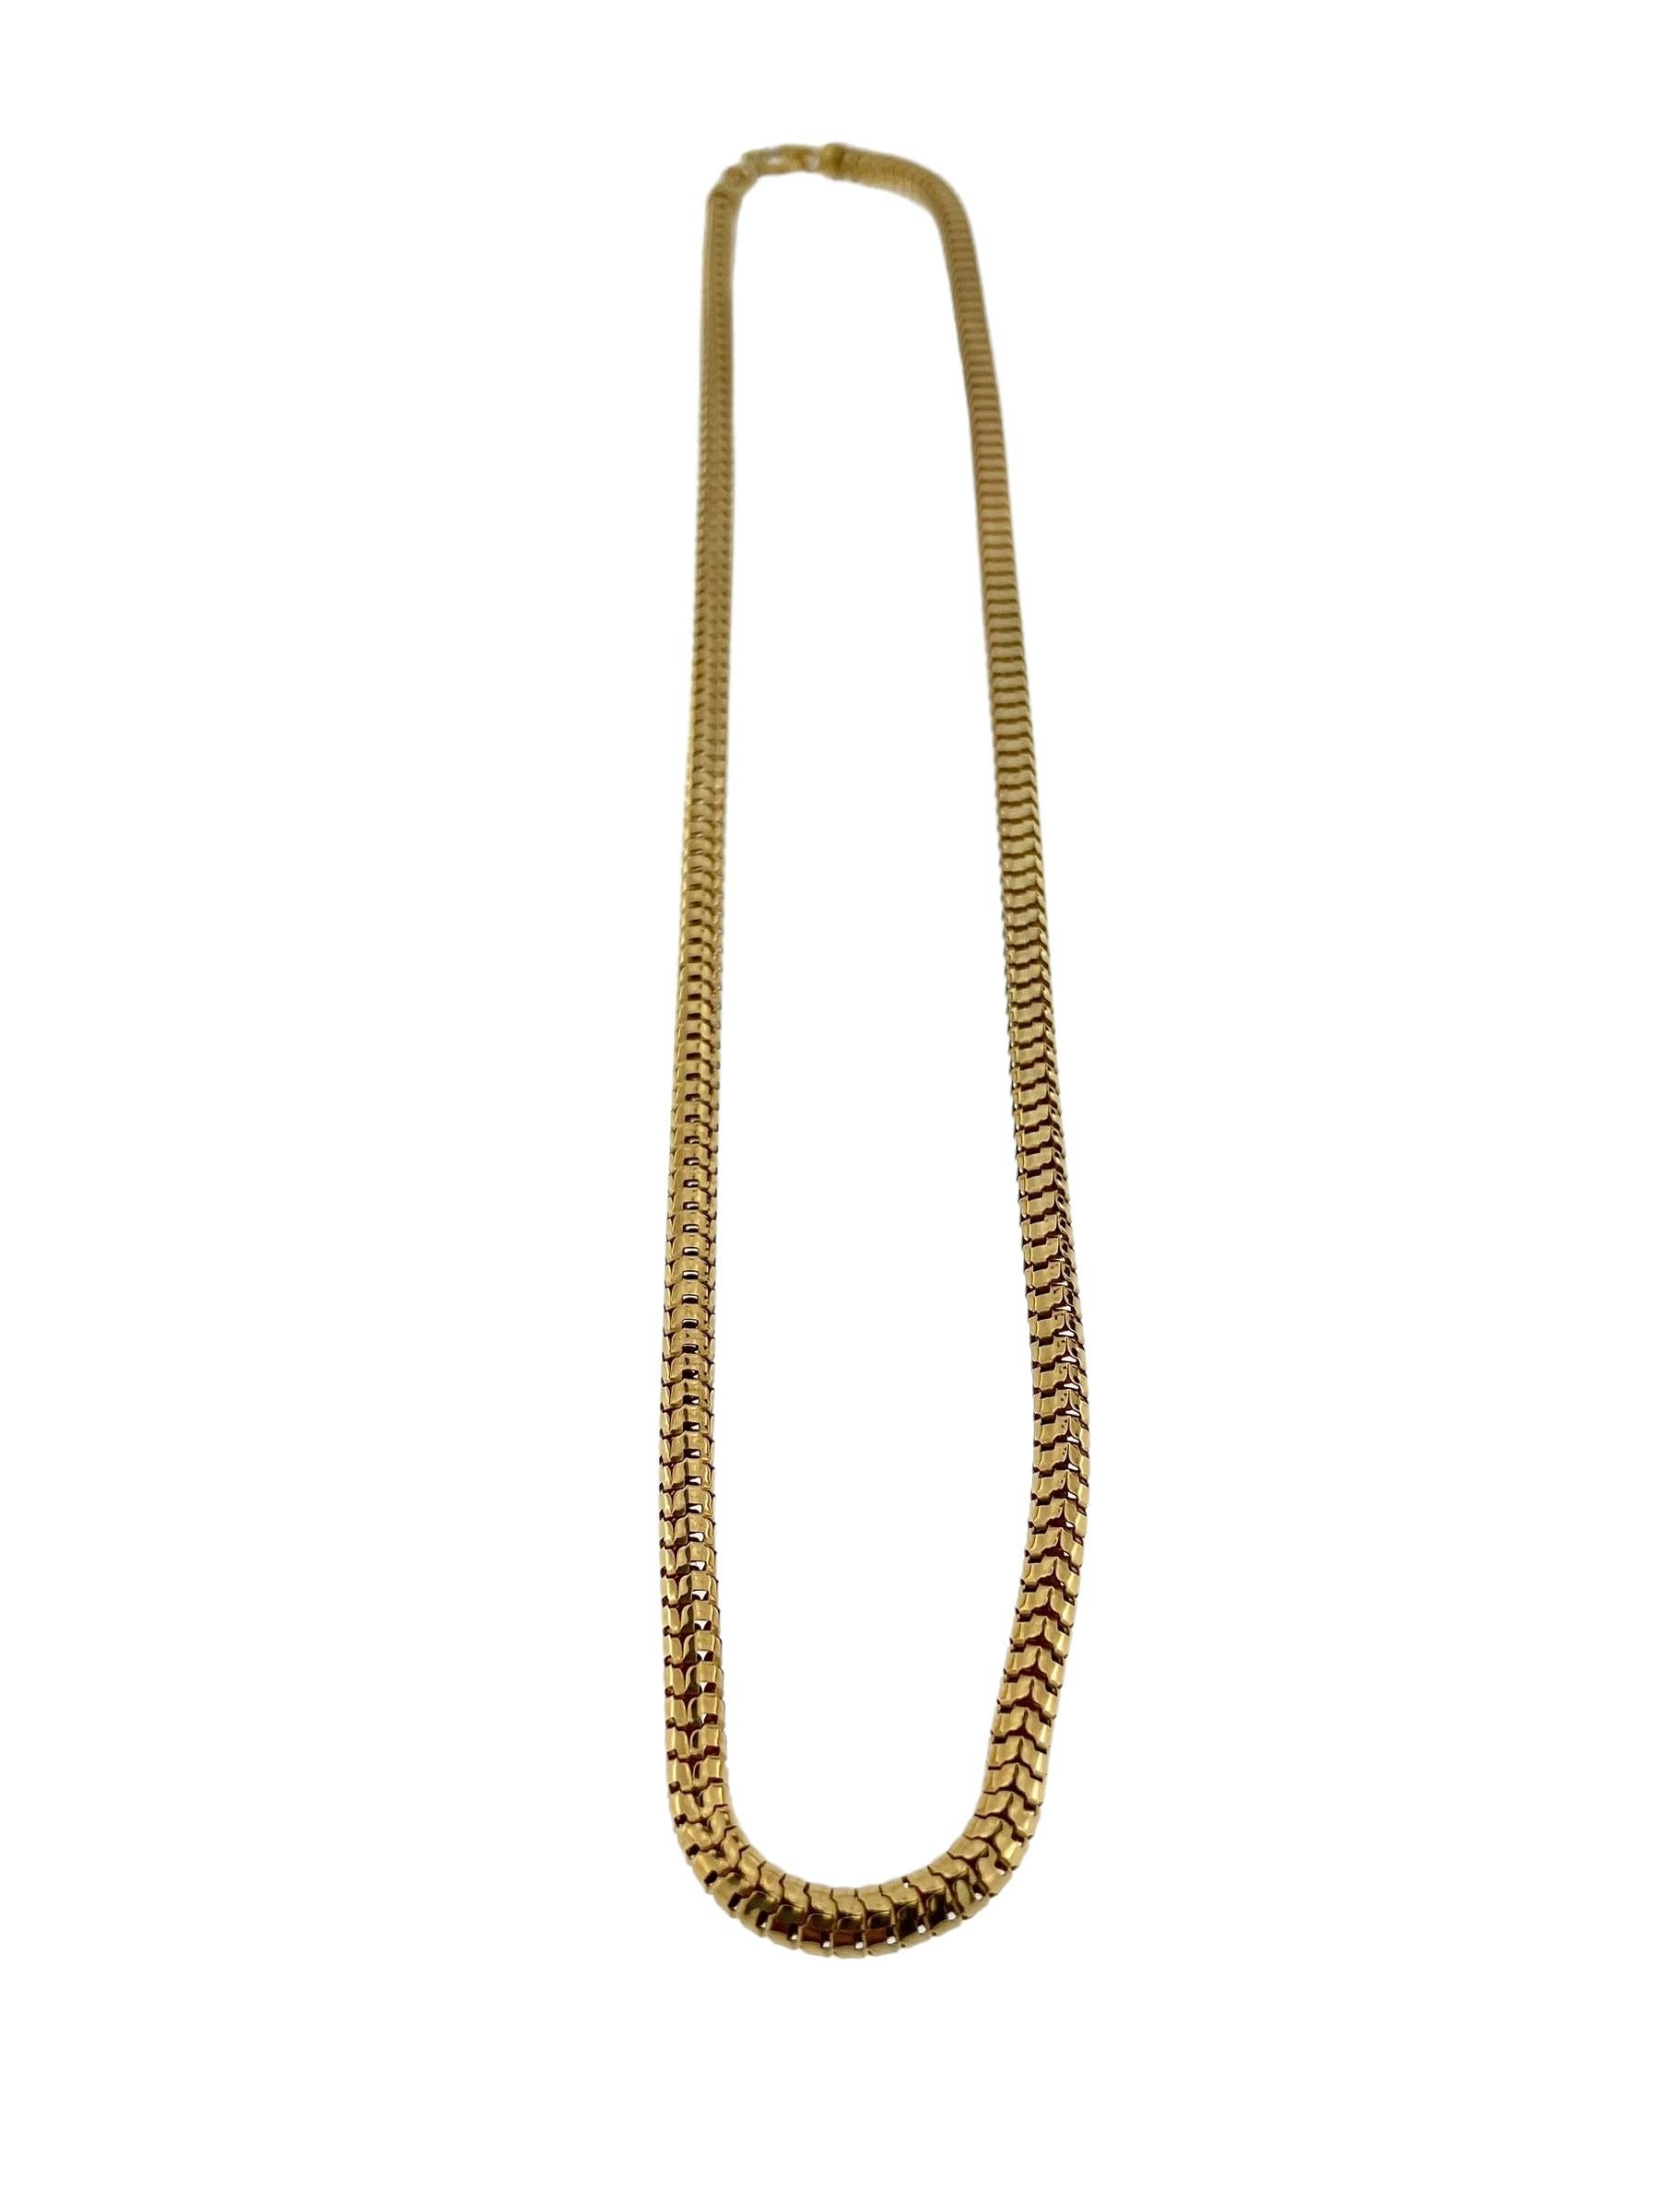 UnoAErre Yellow Gold Necklace For Sale 2